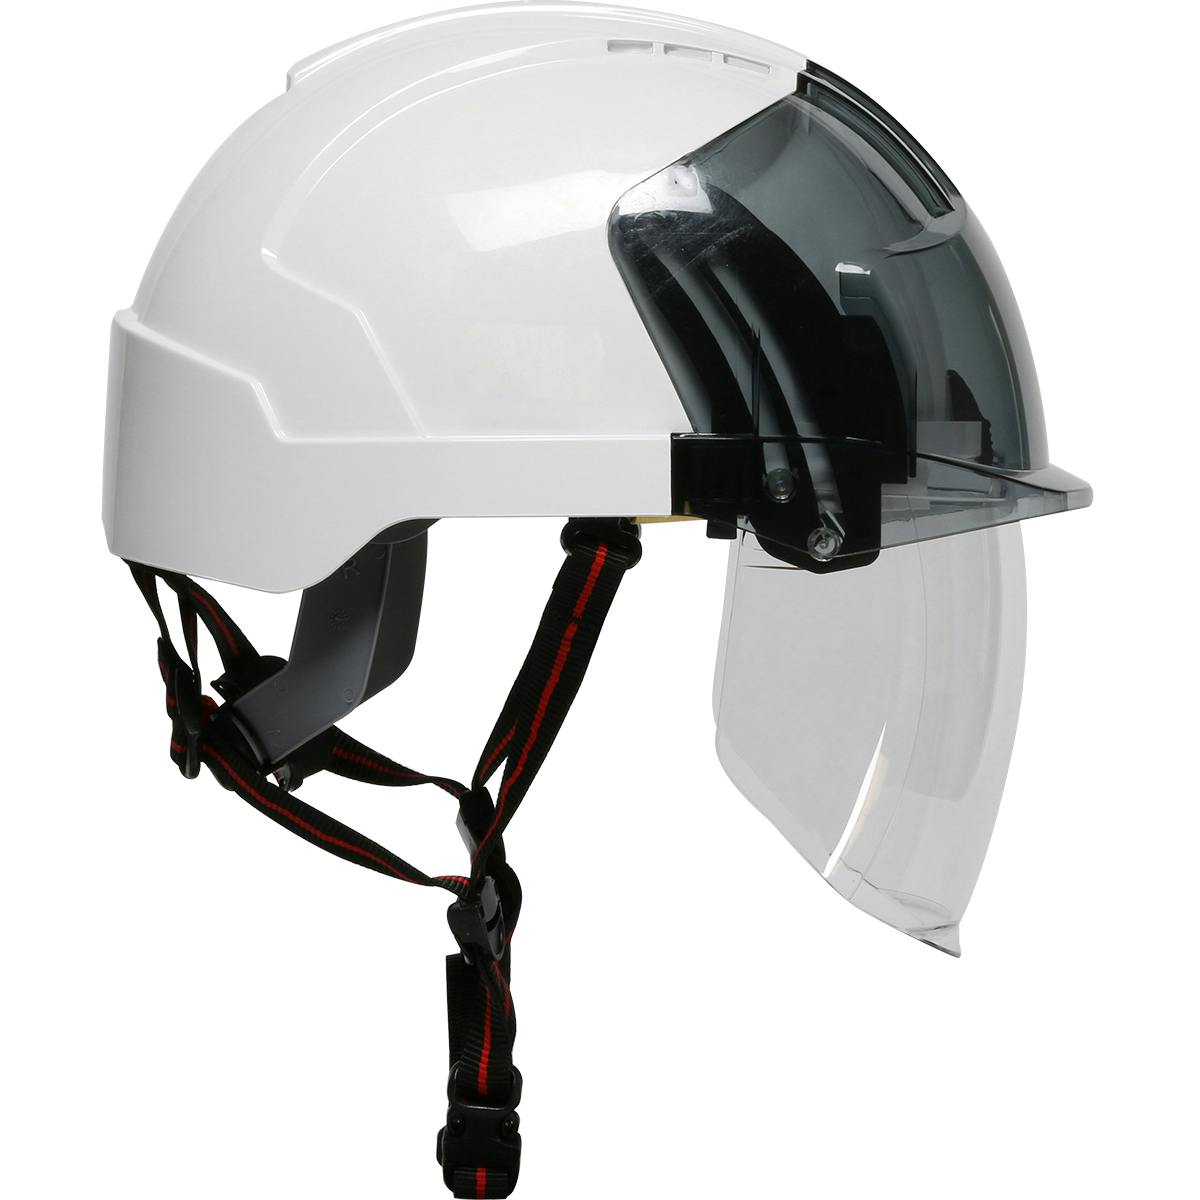 Type I, Non-vented Industrial Safety Helmet with fully adjustable four point chinstrap, Lightweight ABS Shell, Integrated Faceshield, 6-Point Polyester Suspension and Wheel Ratchet Adjustment, White-Smoke (280-EVSN-CH) - OS_4